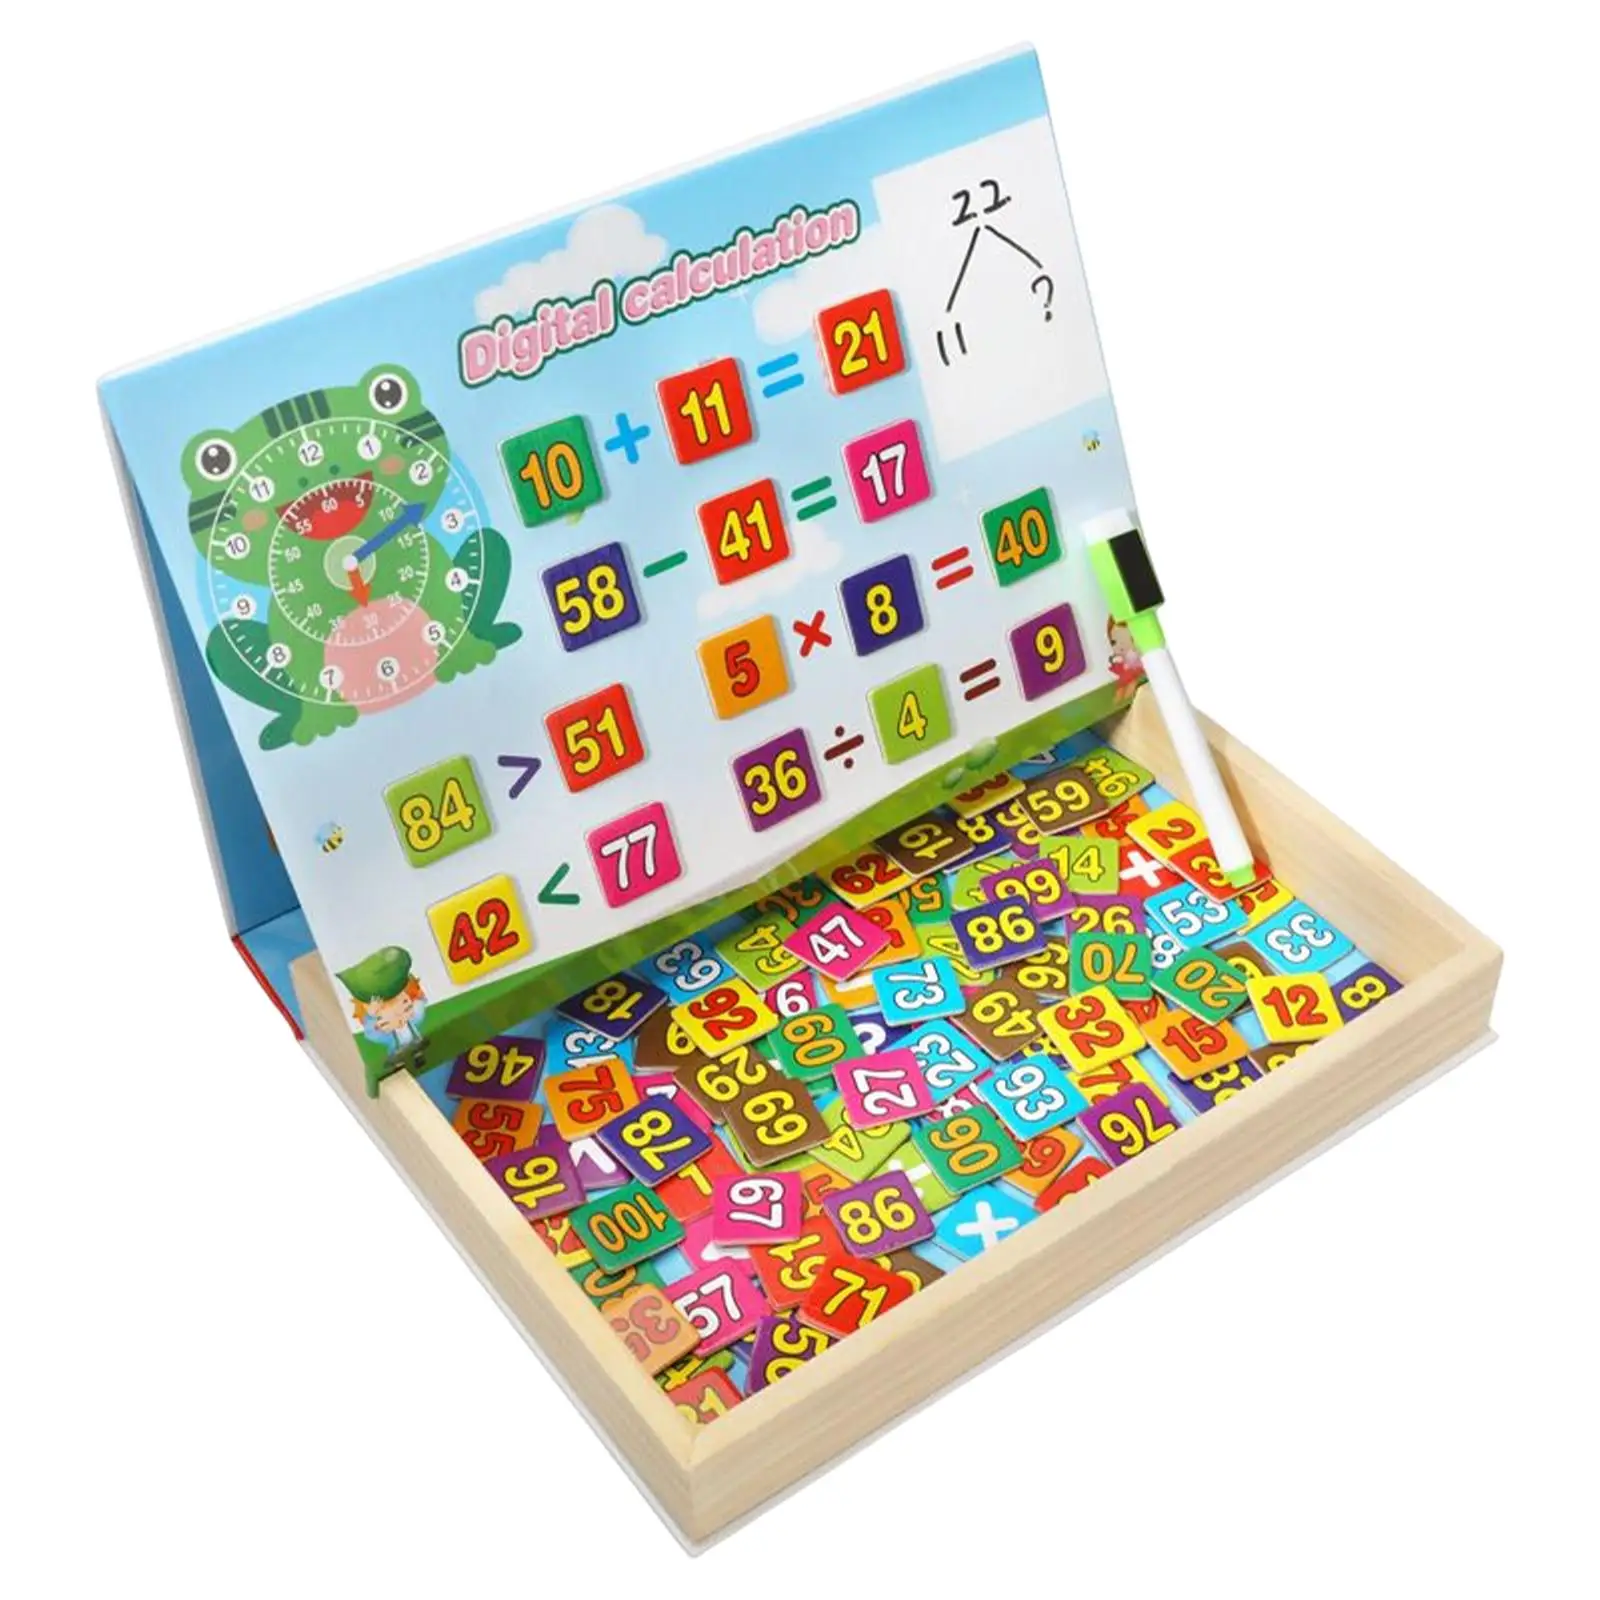  Math Toys Child Multiplication and Division Wood Storage Box